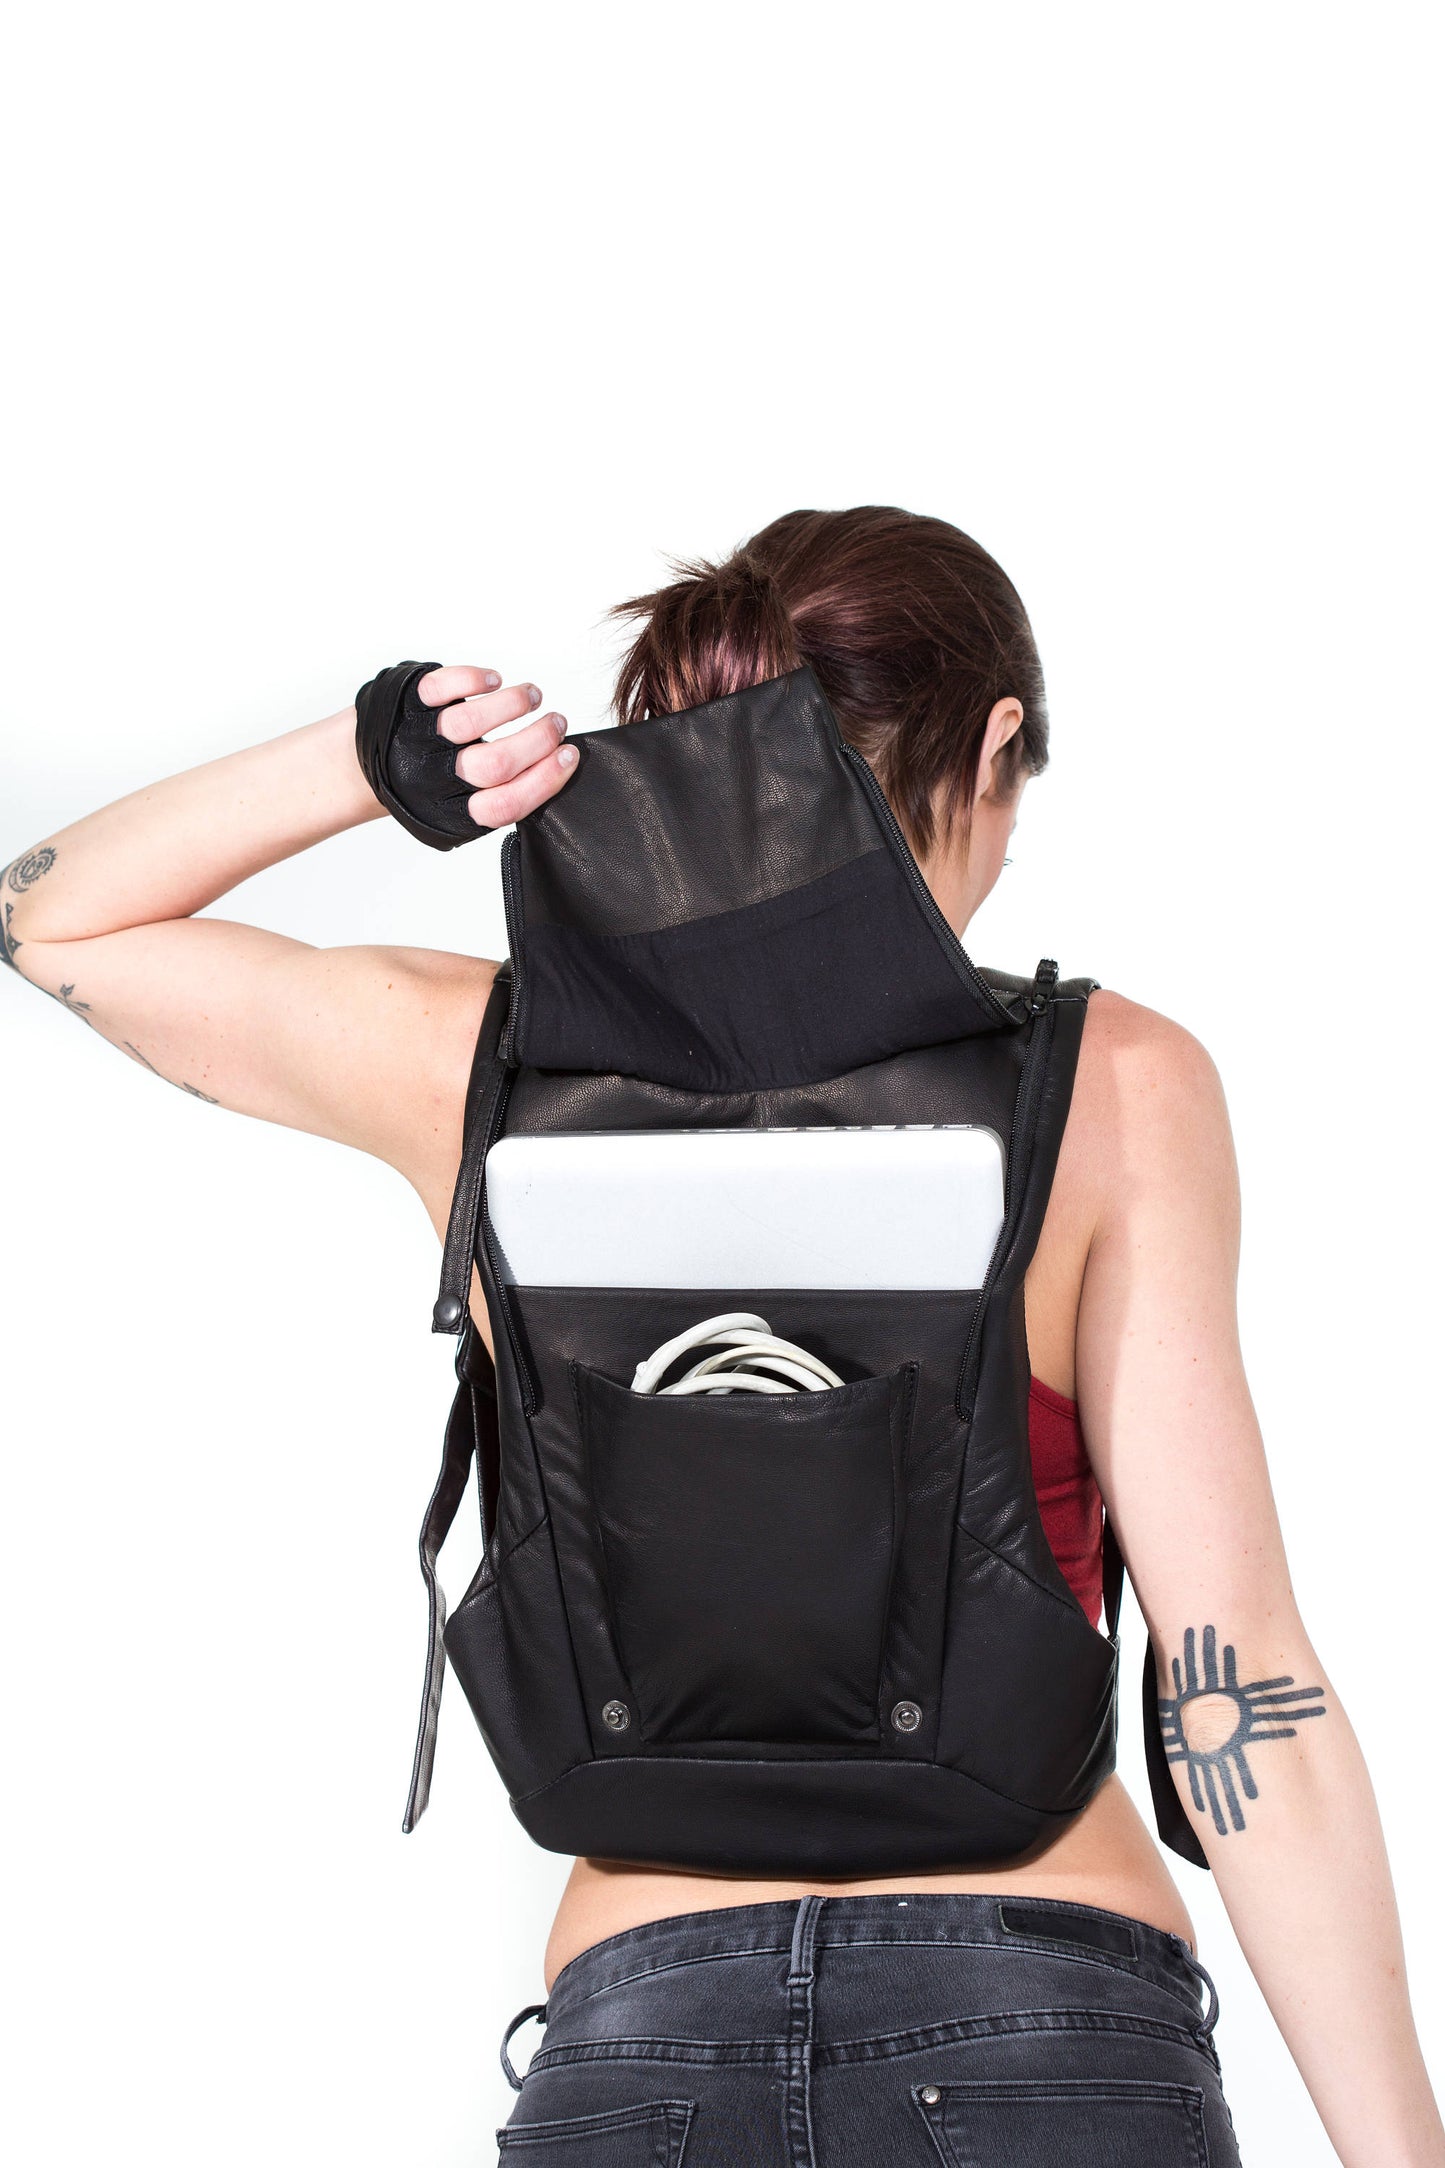 RESIST-TECH Leather Ninja Backpack by Jungle Tribe